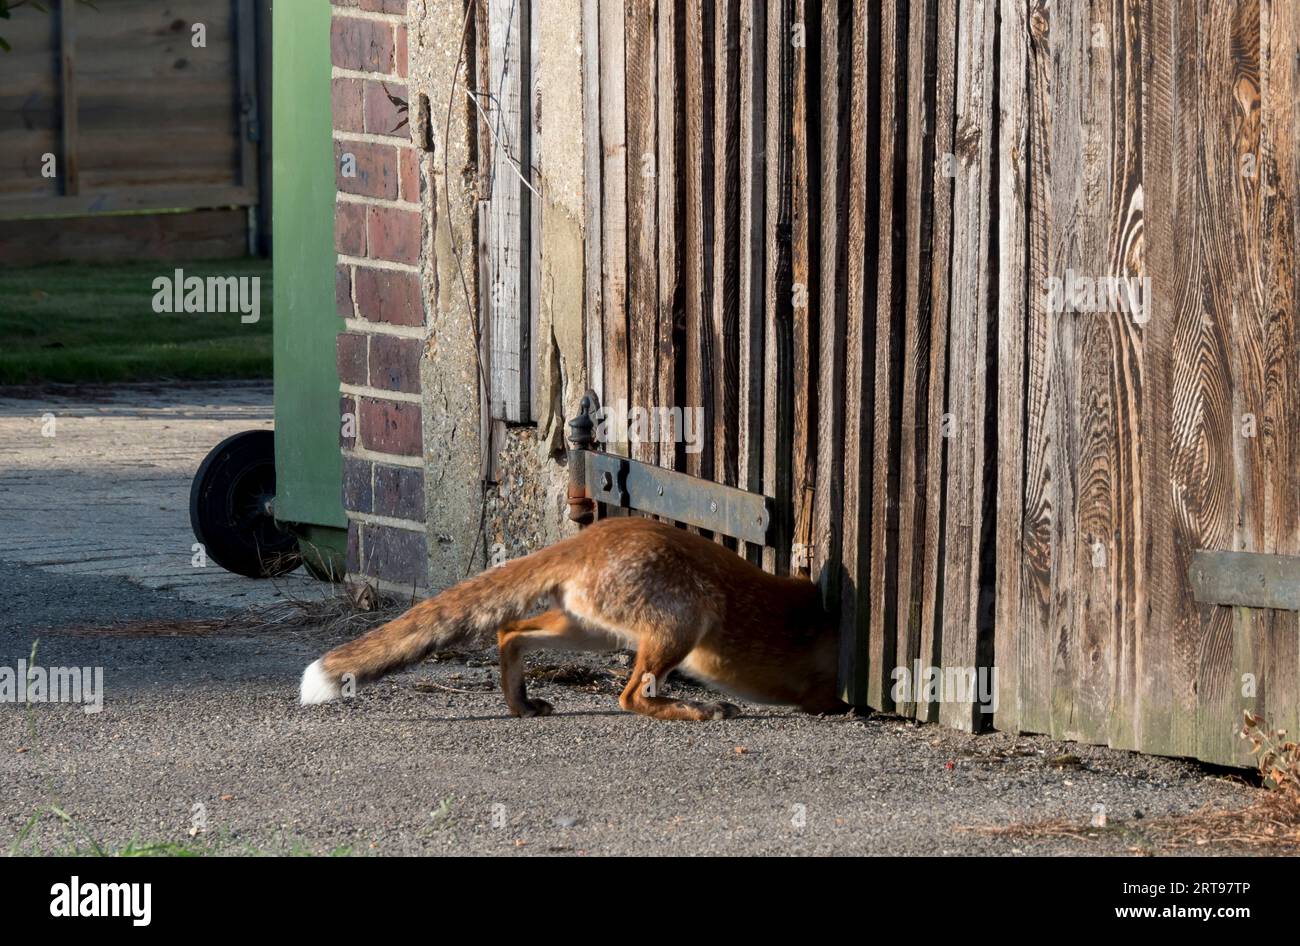 Europe, Royaume-Uni, angleterre, Londres, Fox Urban Banque D'Images